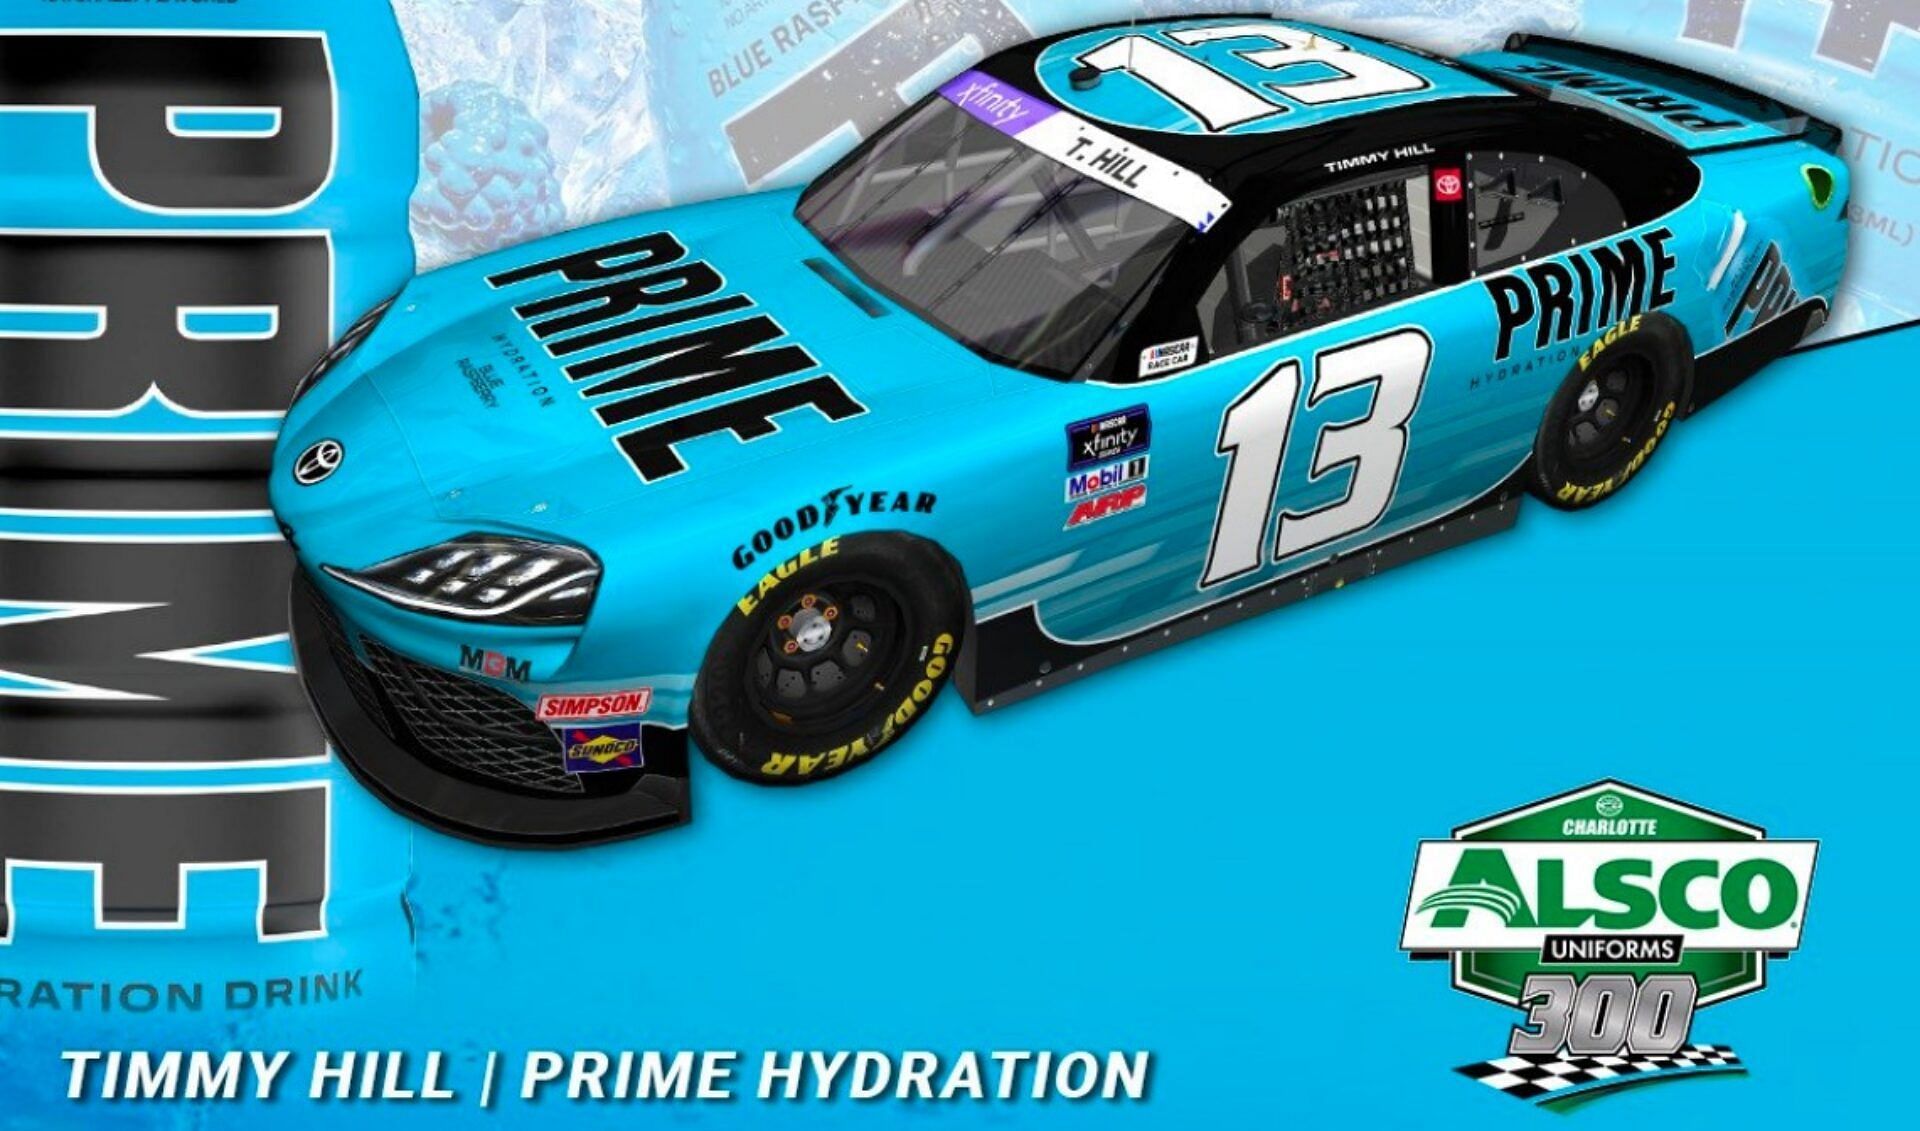 Prime Hydration, Logan Paul&#039;s new sports drink company makes NASCAR debut at Charlotte Motor Speedway with MGM Motorsports.